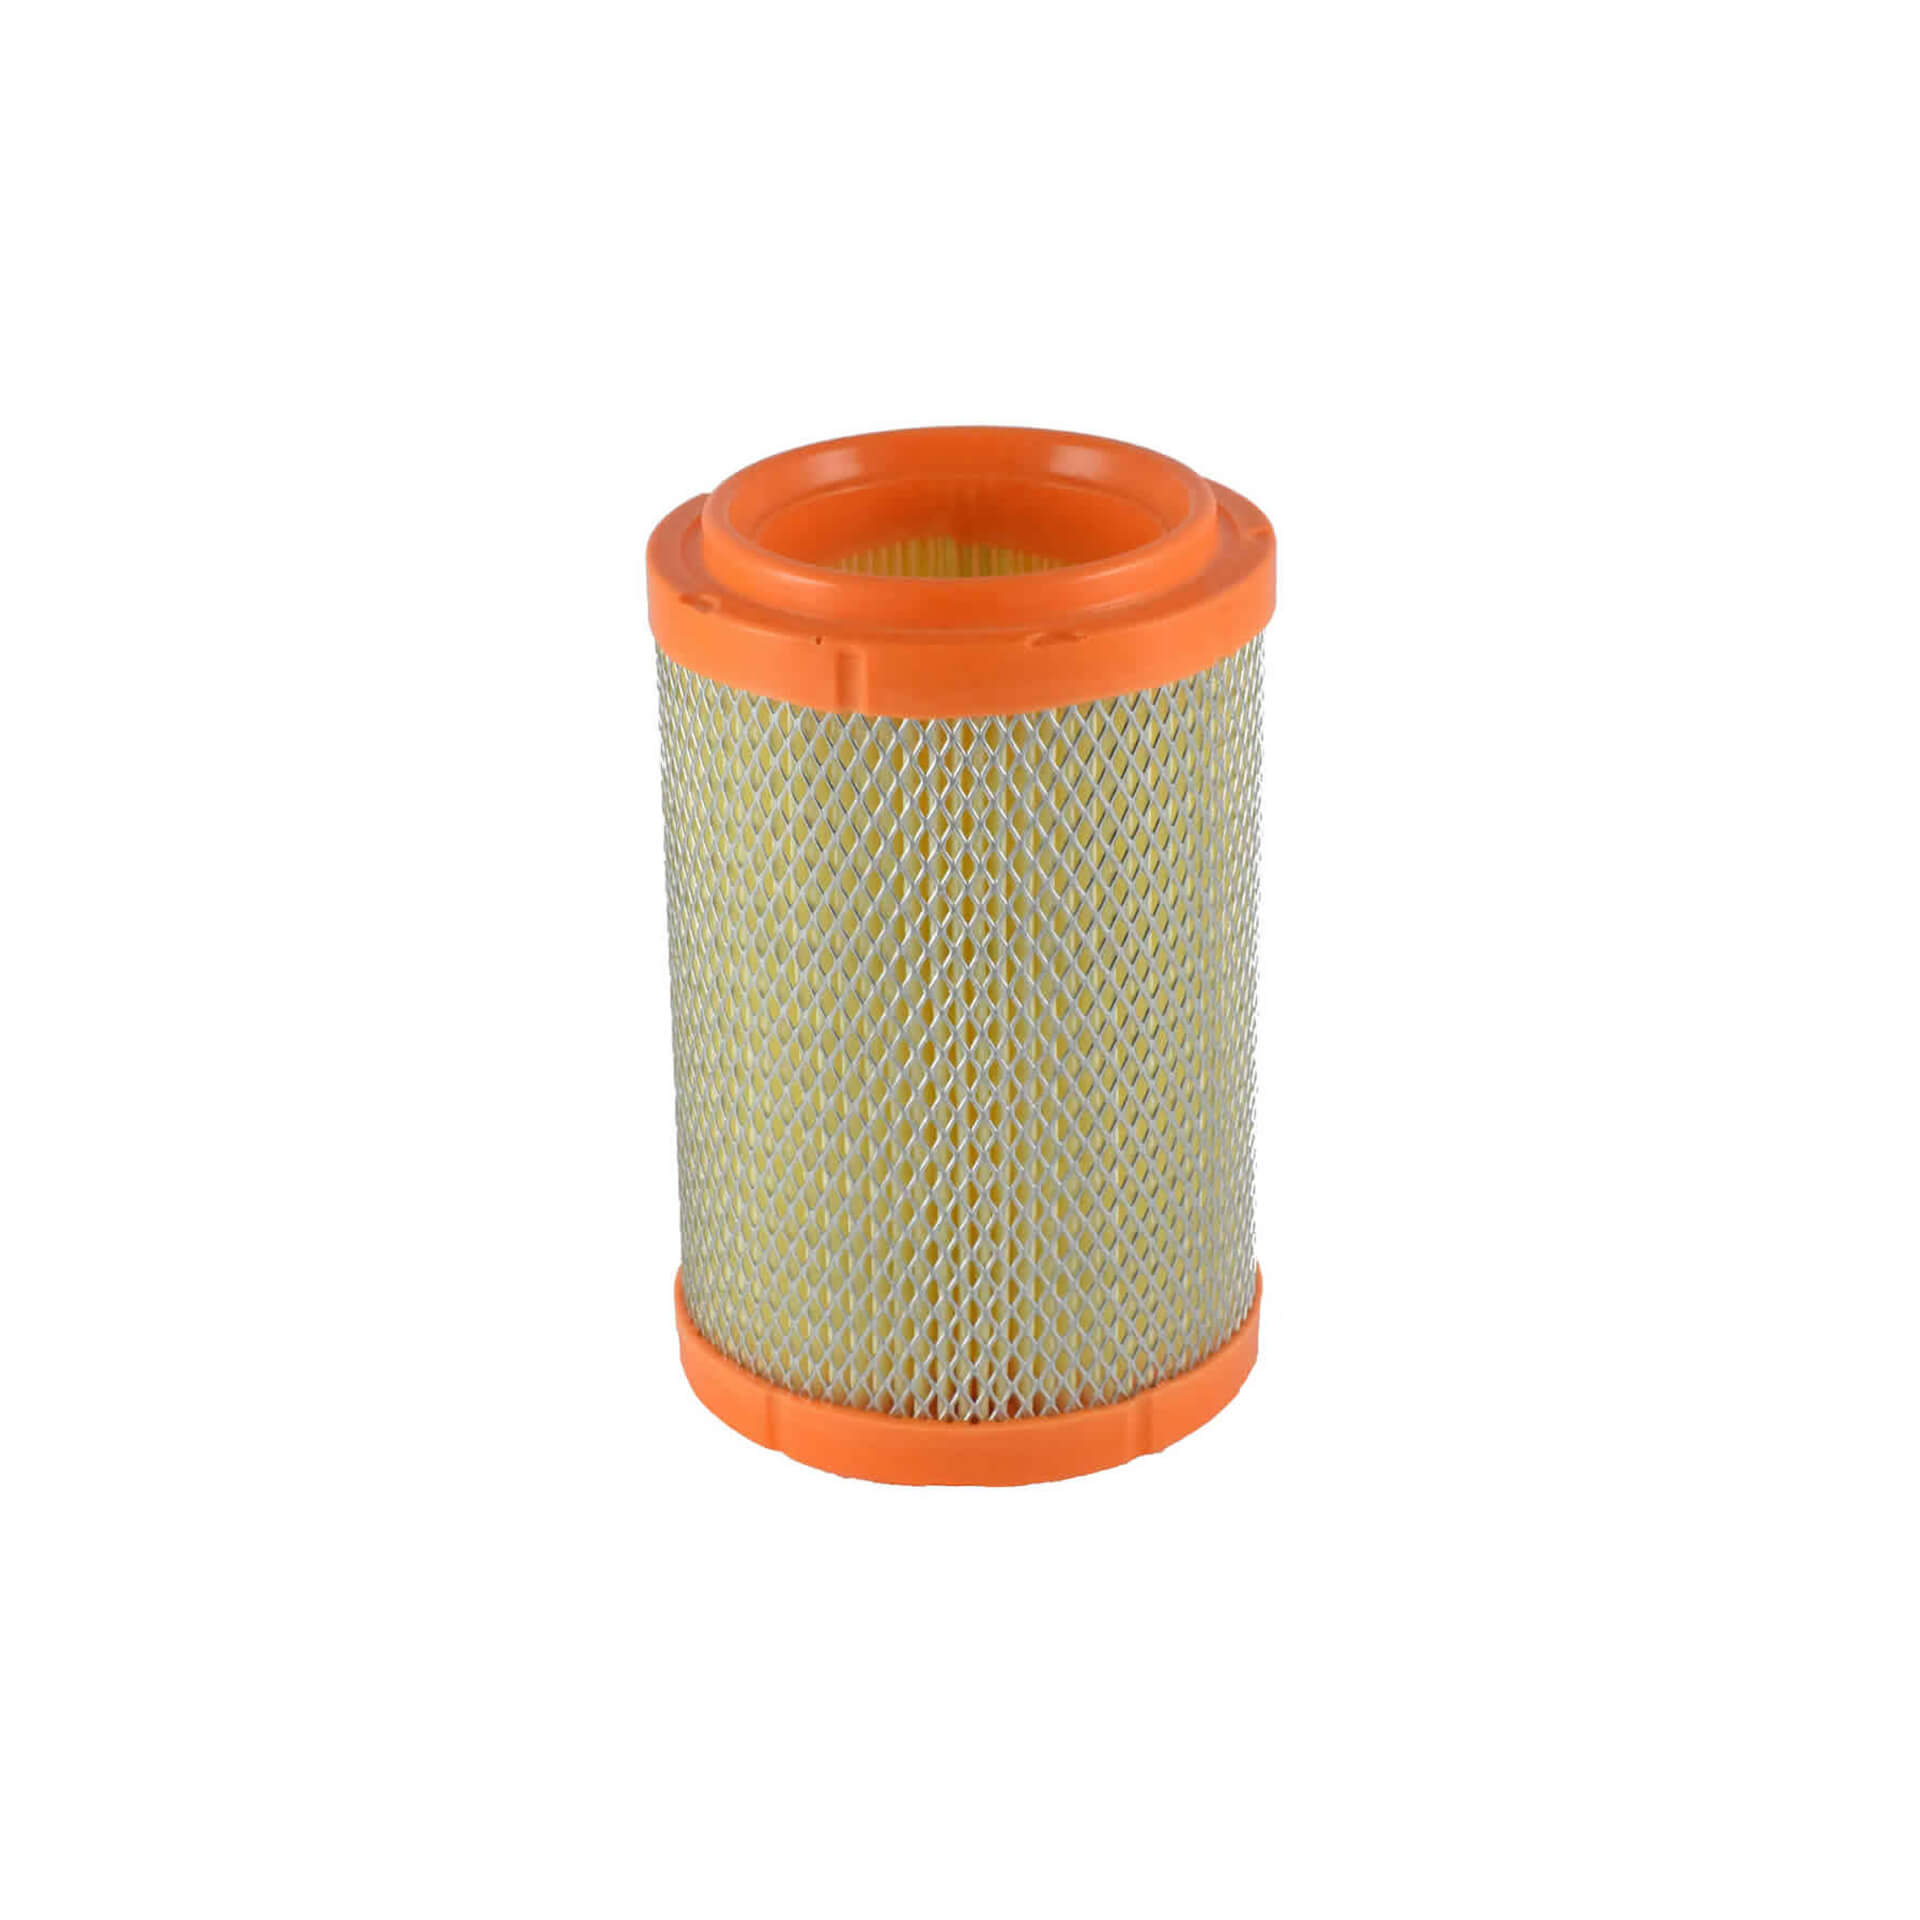 CHAMPION air filter for DUCATI